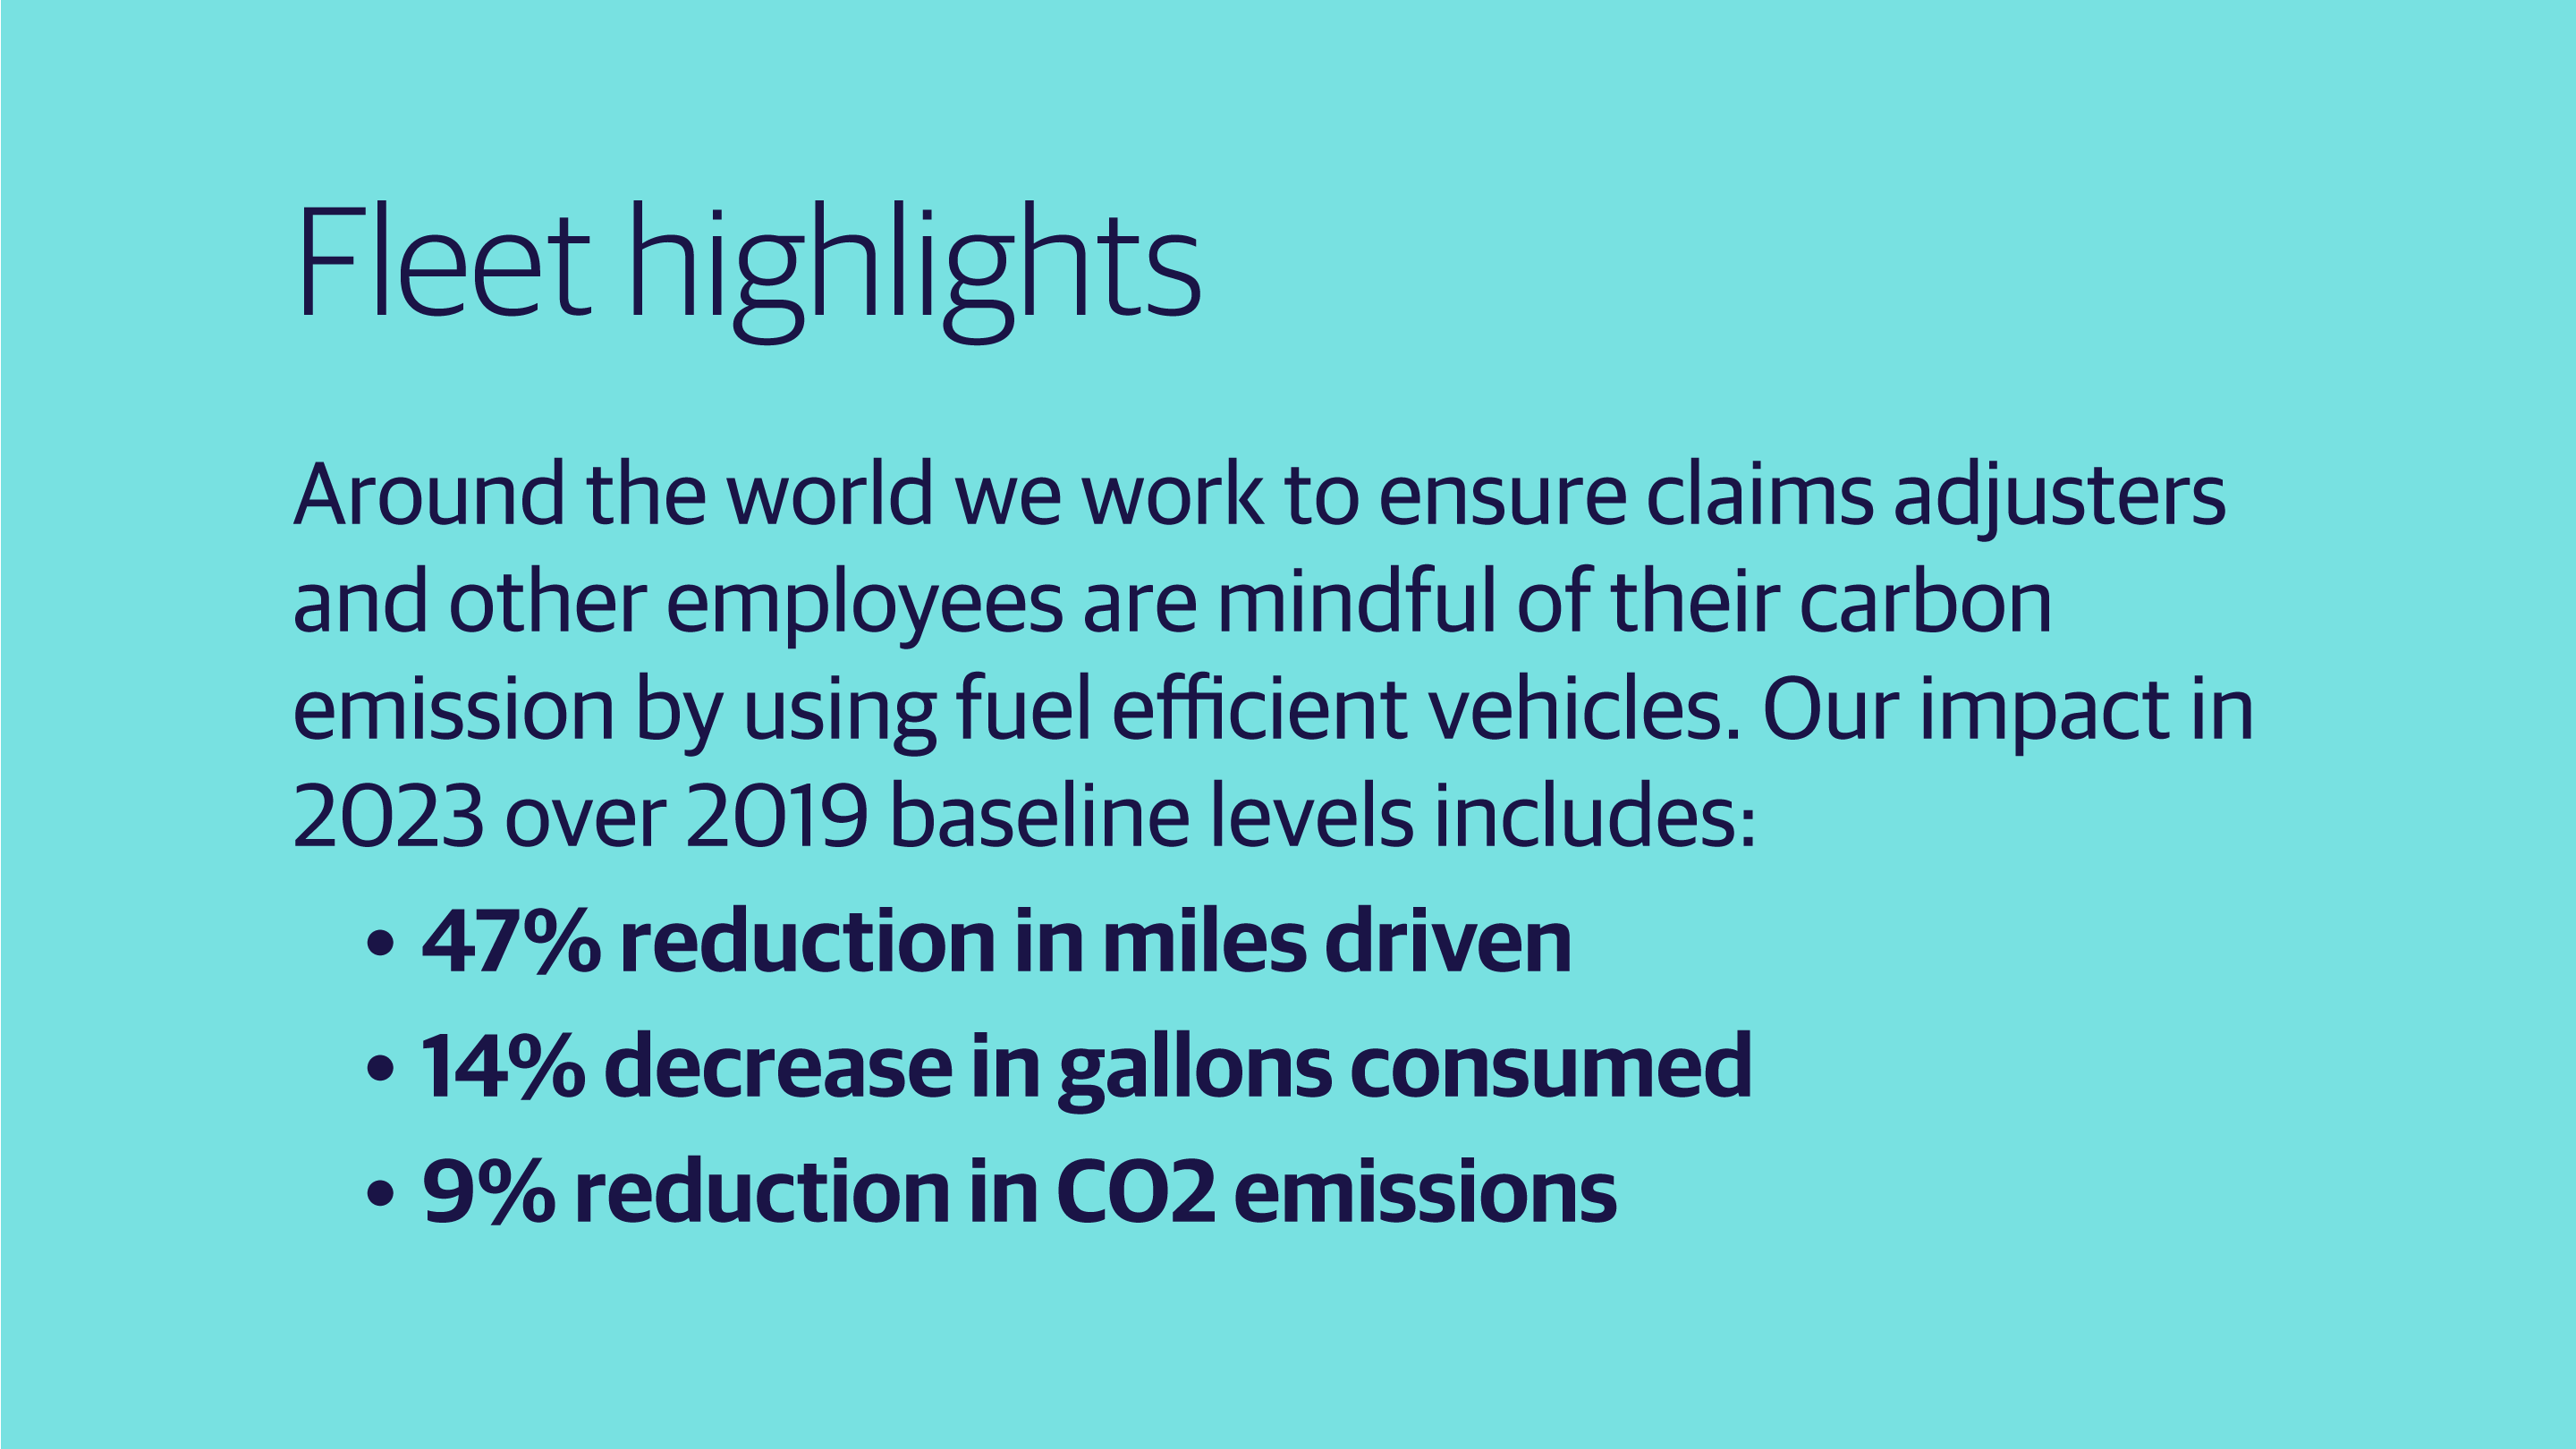 (slide 3 of 4) leet highlights    Around the world we work to ensure claims adjusters and other employees are mindful of their carbon emission by using fuel efficient vehicles. Our impact in 2023 over 2019 baseline levels includes:    47% reduction in miles driven    14% decrease in gallons consumed    9% reduction in CO2 emissions    14% fuel savings . 